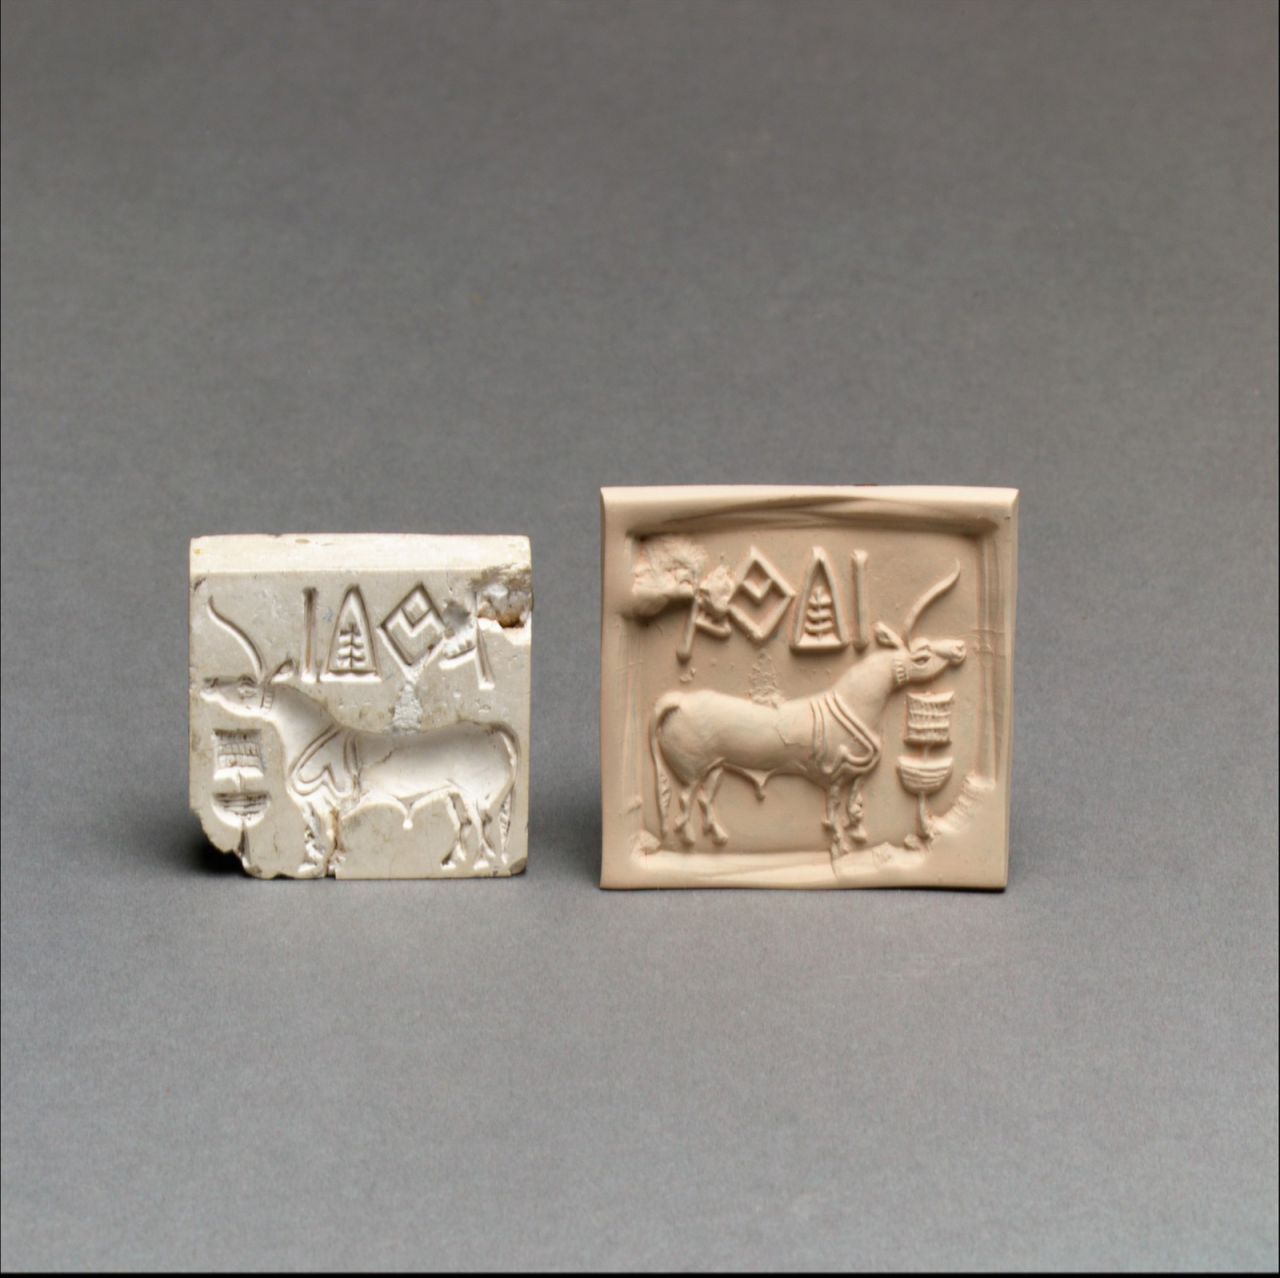 Among the oldest items featured in the encyclopedia are the stamp seals made in the Indus Valley as long ago as 2600 BCE.